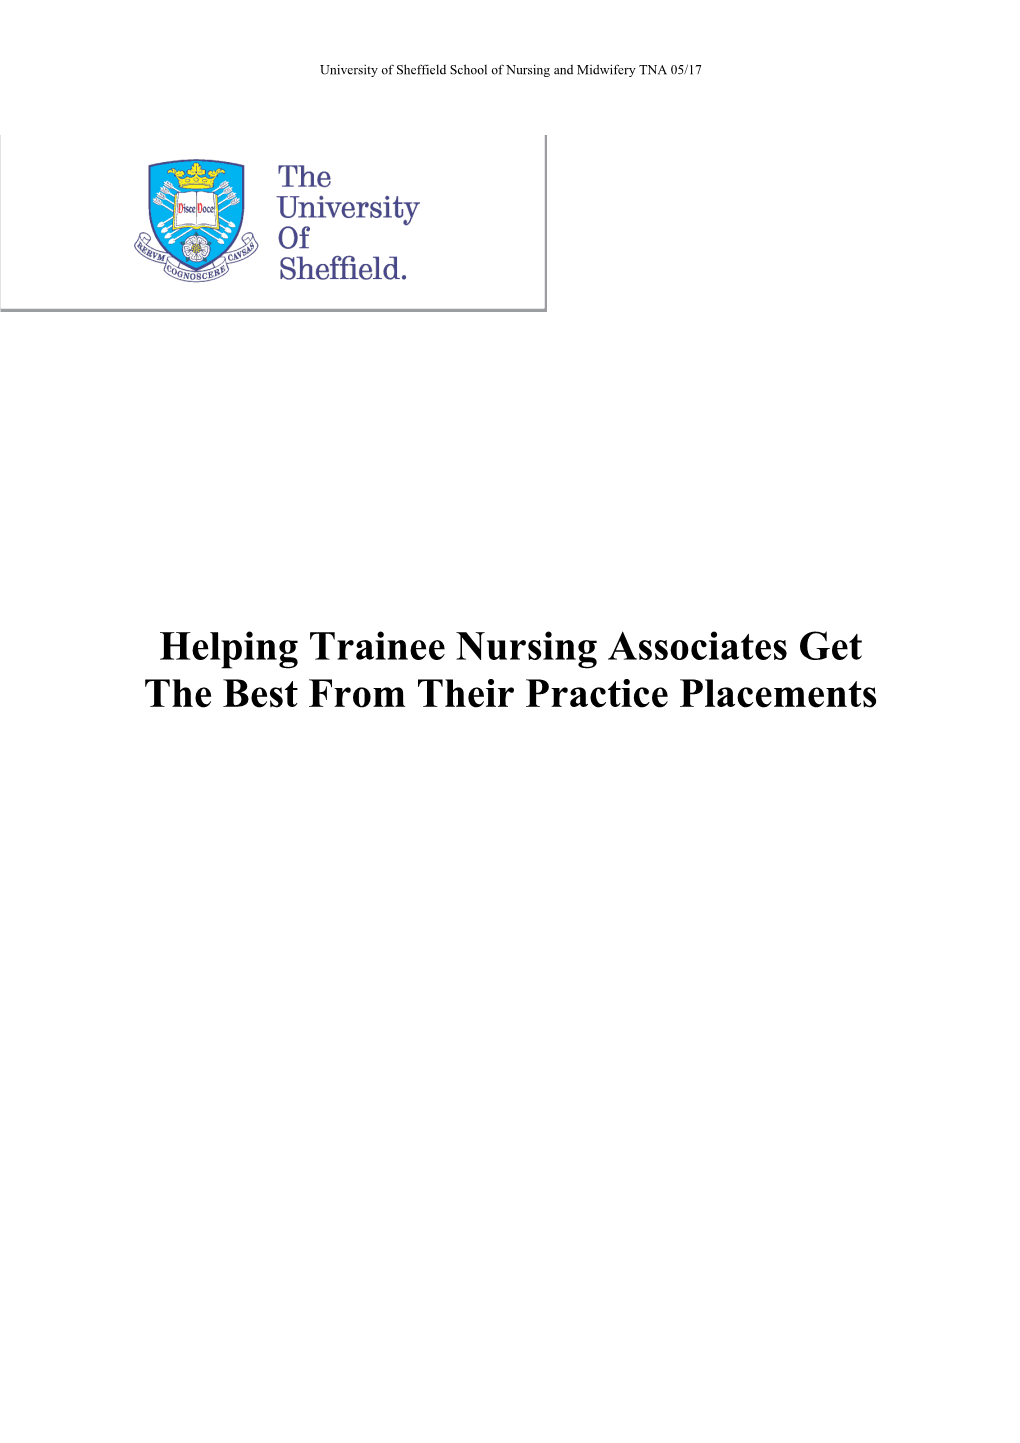 Helping Trainee Nursing Associates Get the Best from Their Practice Placements